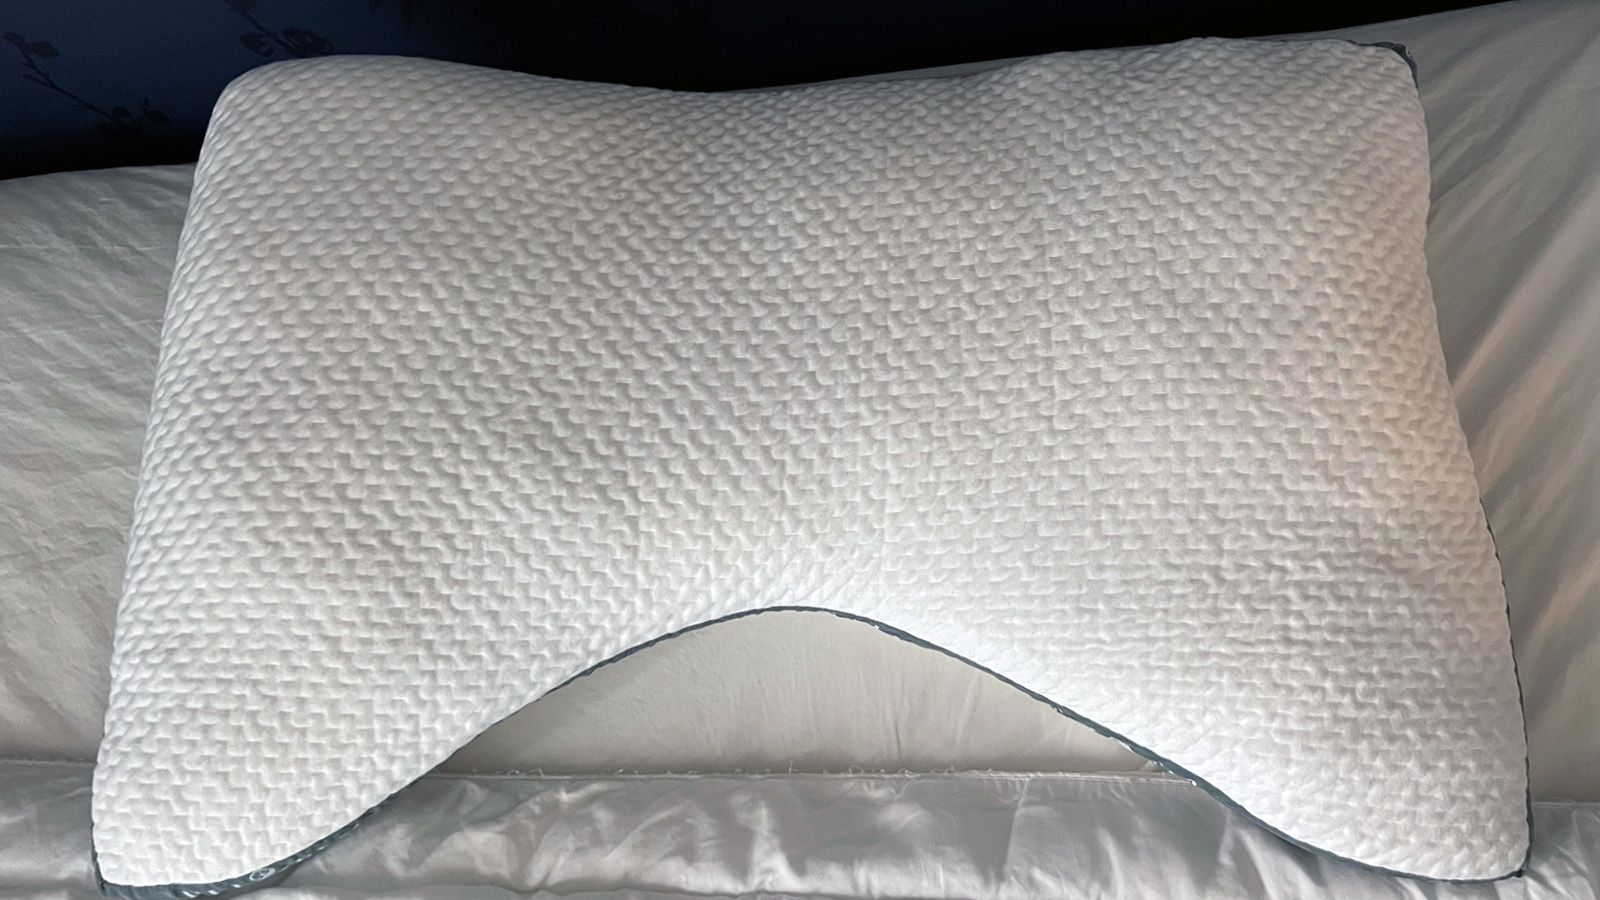 How To Find The Best Pillow For Side Sleepers